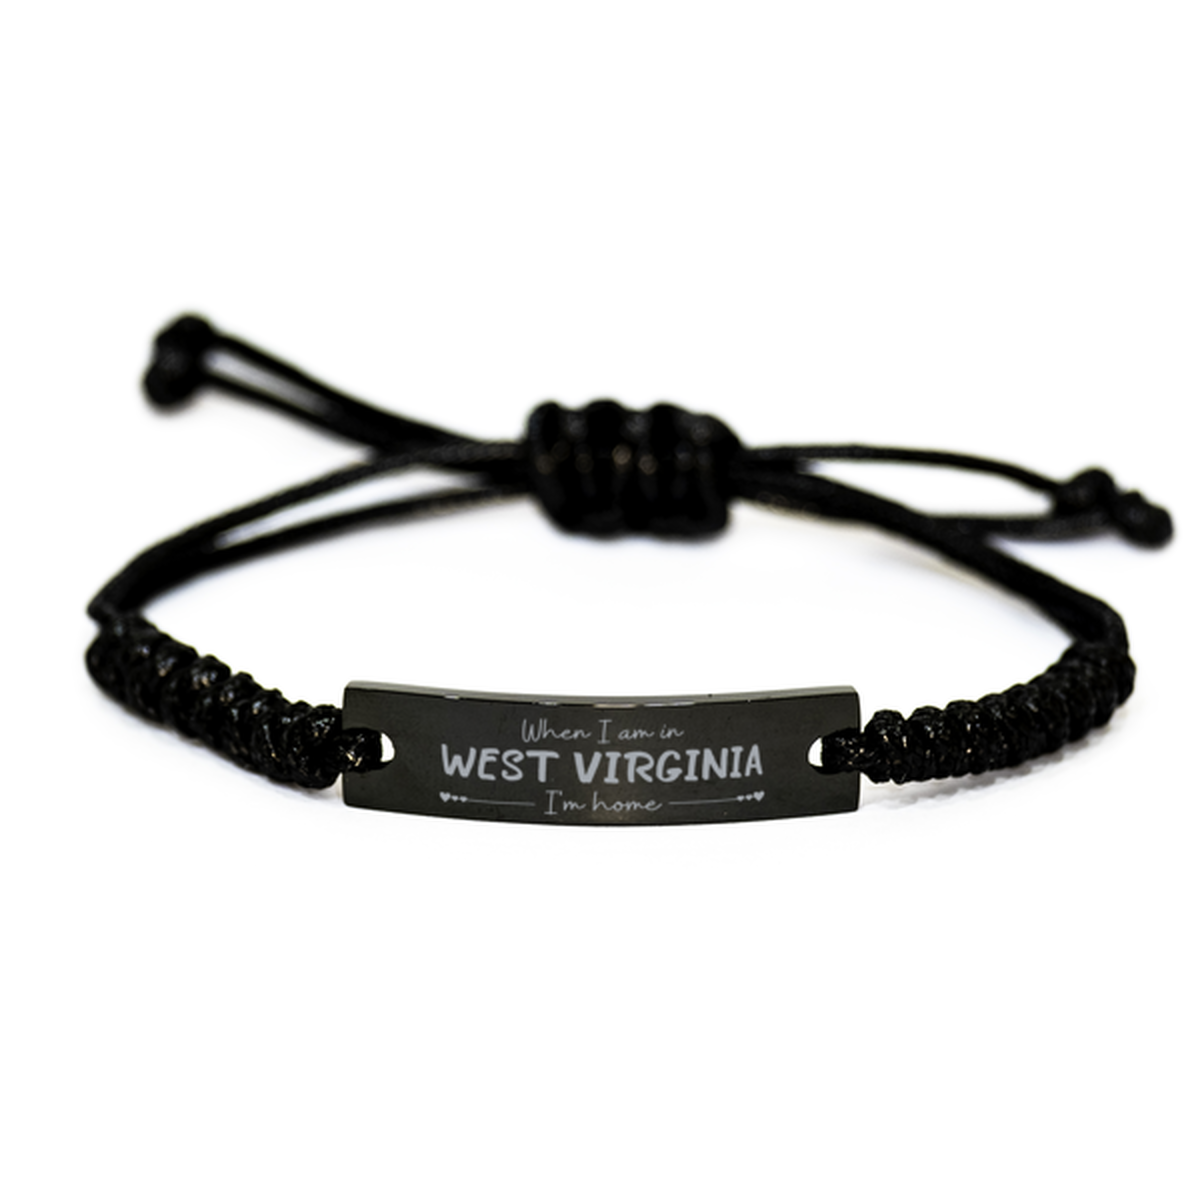 When I am in West Virginia I'm home Black Rope Bracelet, Cheap Gifts For West Virginia, State West Virginia Birthday Gifts for Friends Coworker